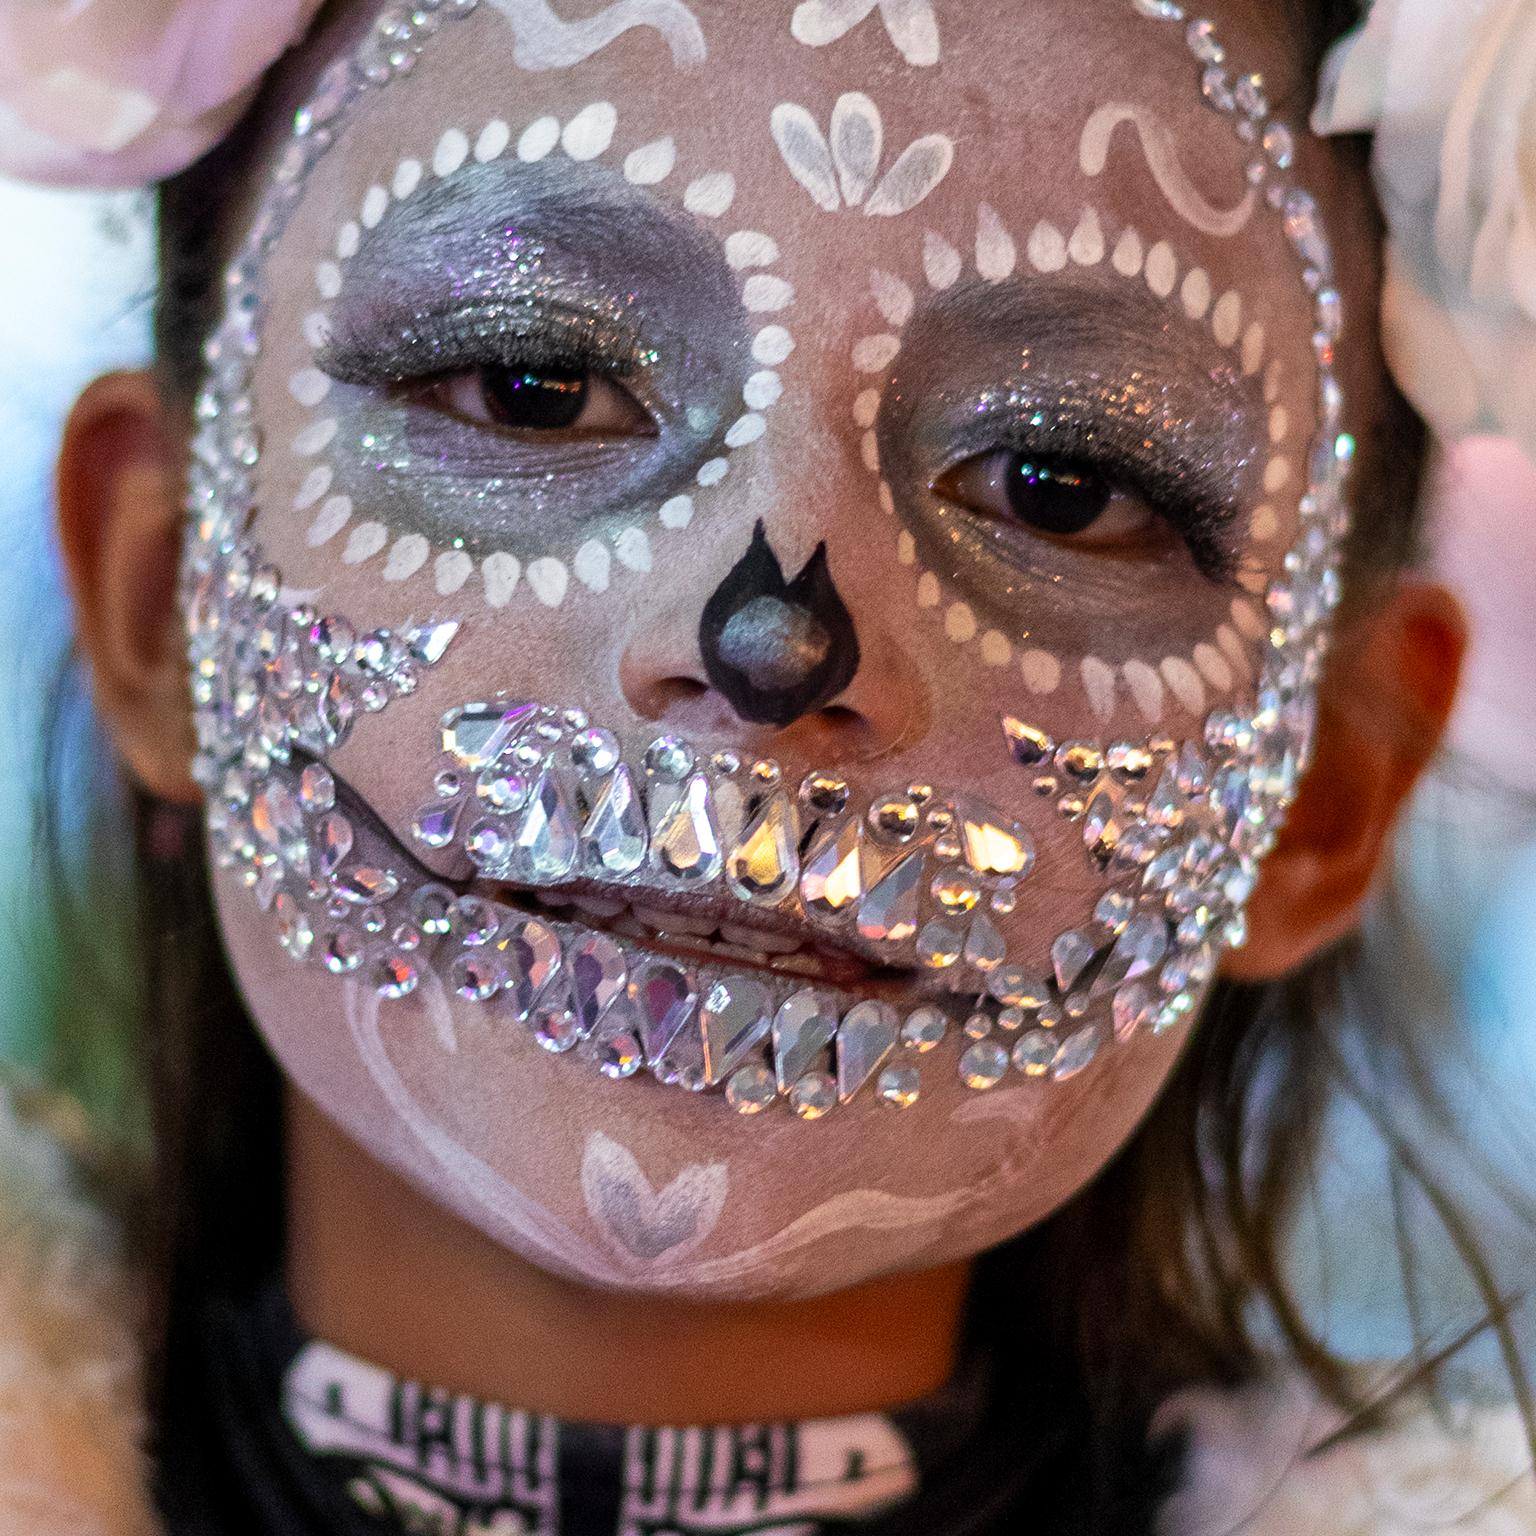 Young Girl Dressed for Day of the Dead, Dia de los Muertos, Isla Mujeres, Mexico - Photograph by  Cosmo Condina